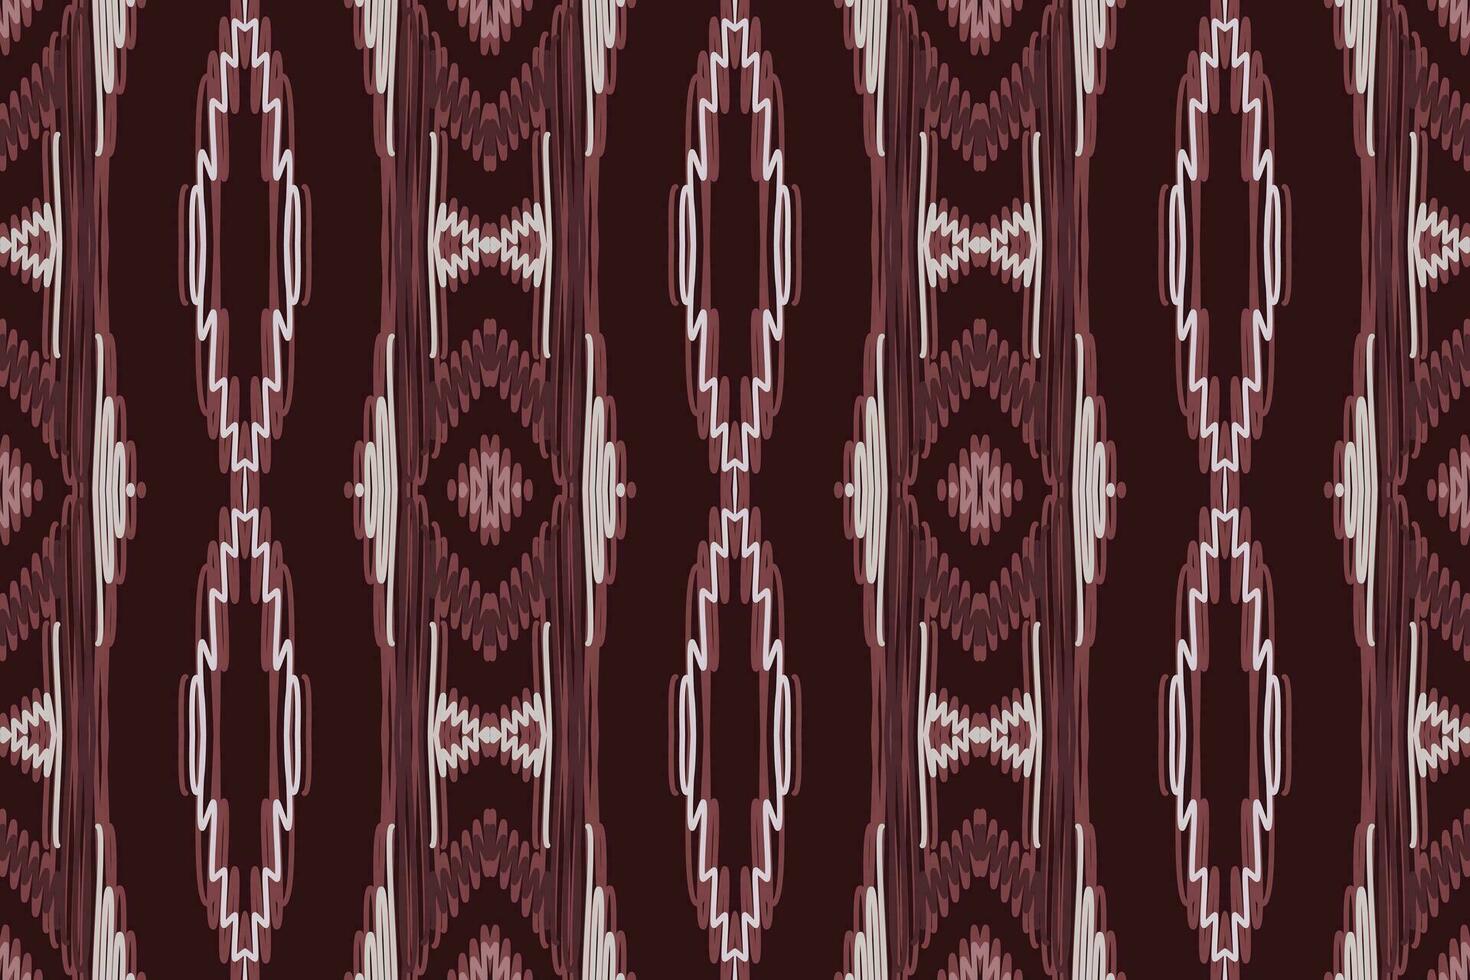 Dupatta pattern Seamless Native American, Motif embroidery, Ikat embroidery vector Design for Print 60s paisley tie dye damascus ornament rugs hipster kurta pajama